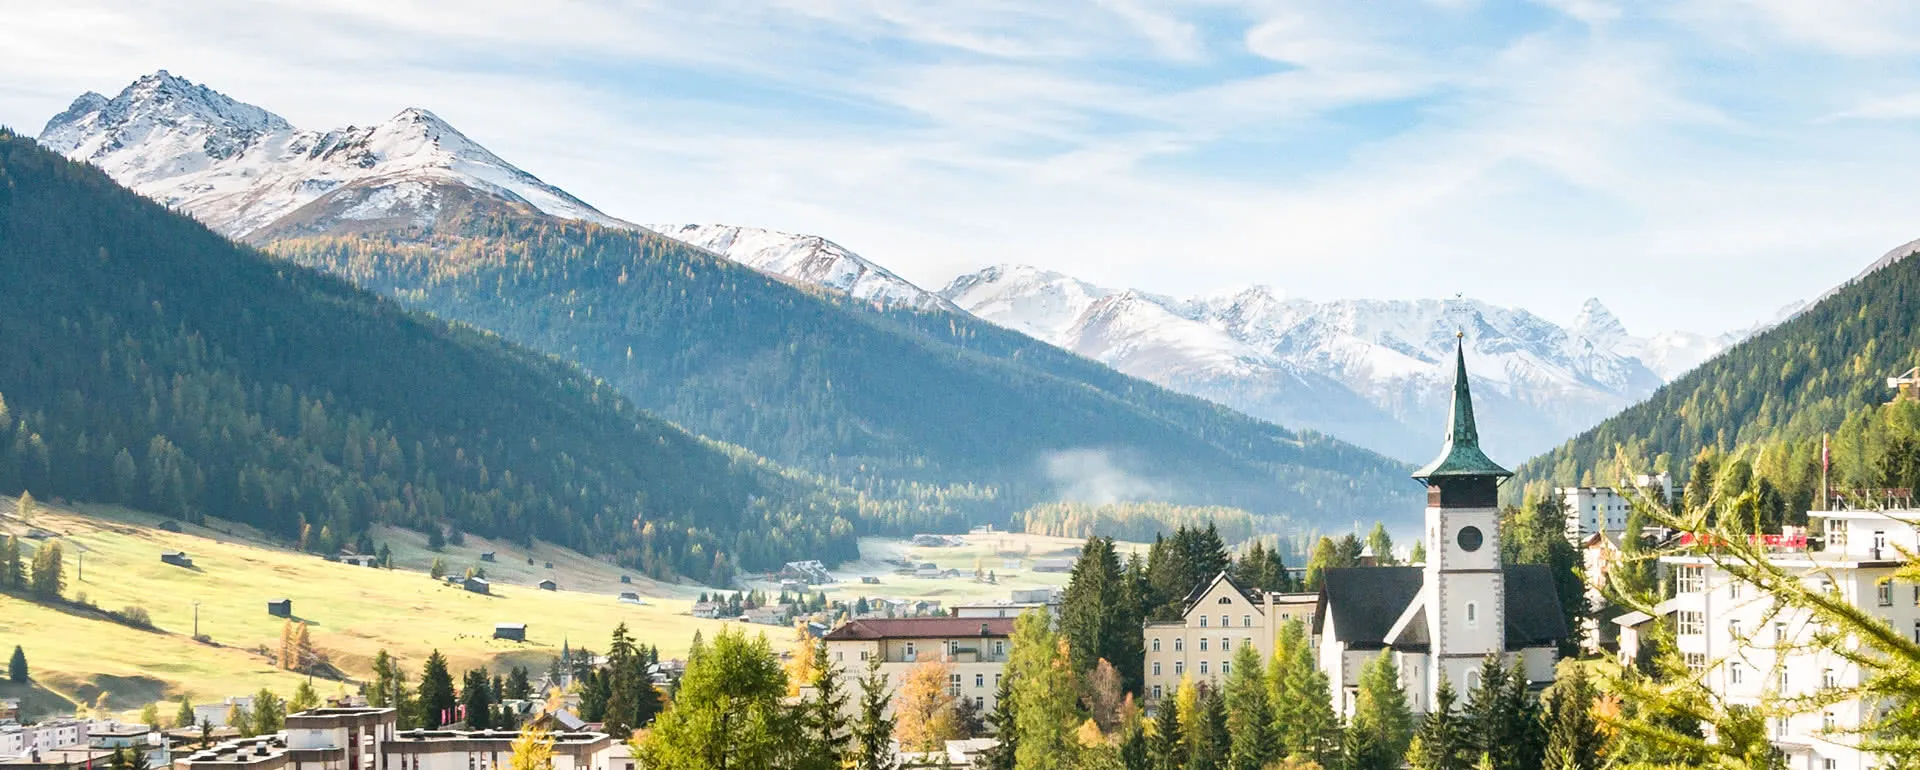 Davos - the destination with youth hostels